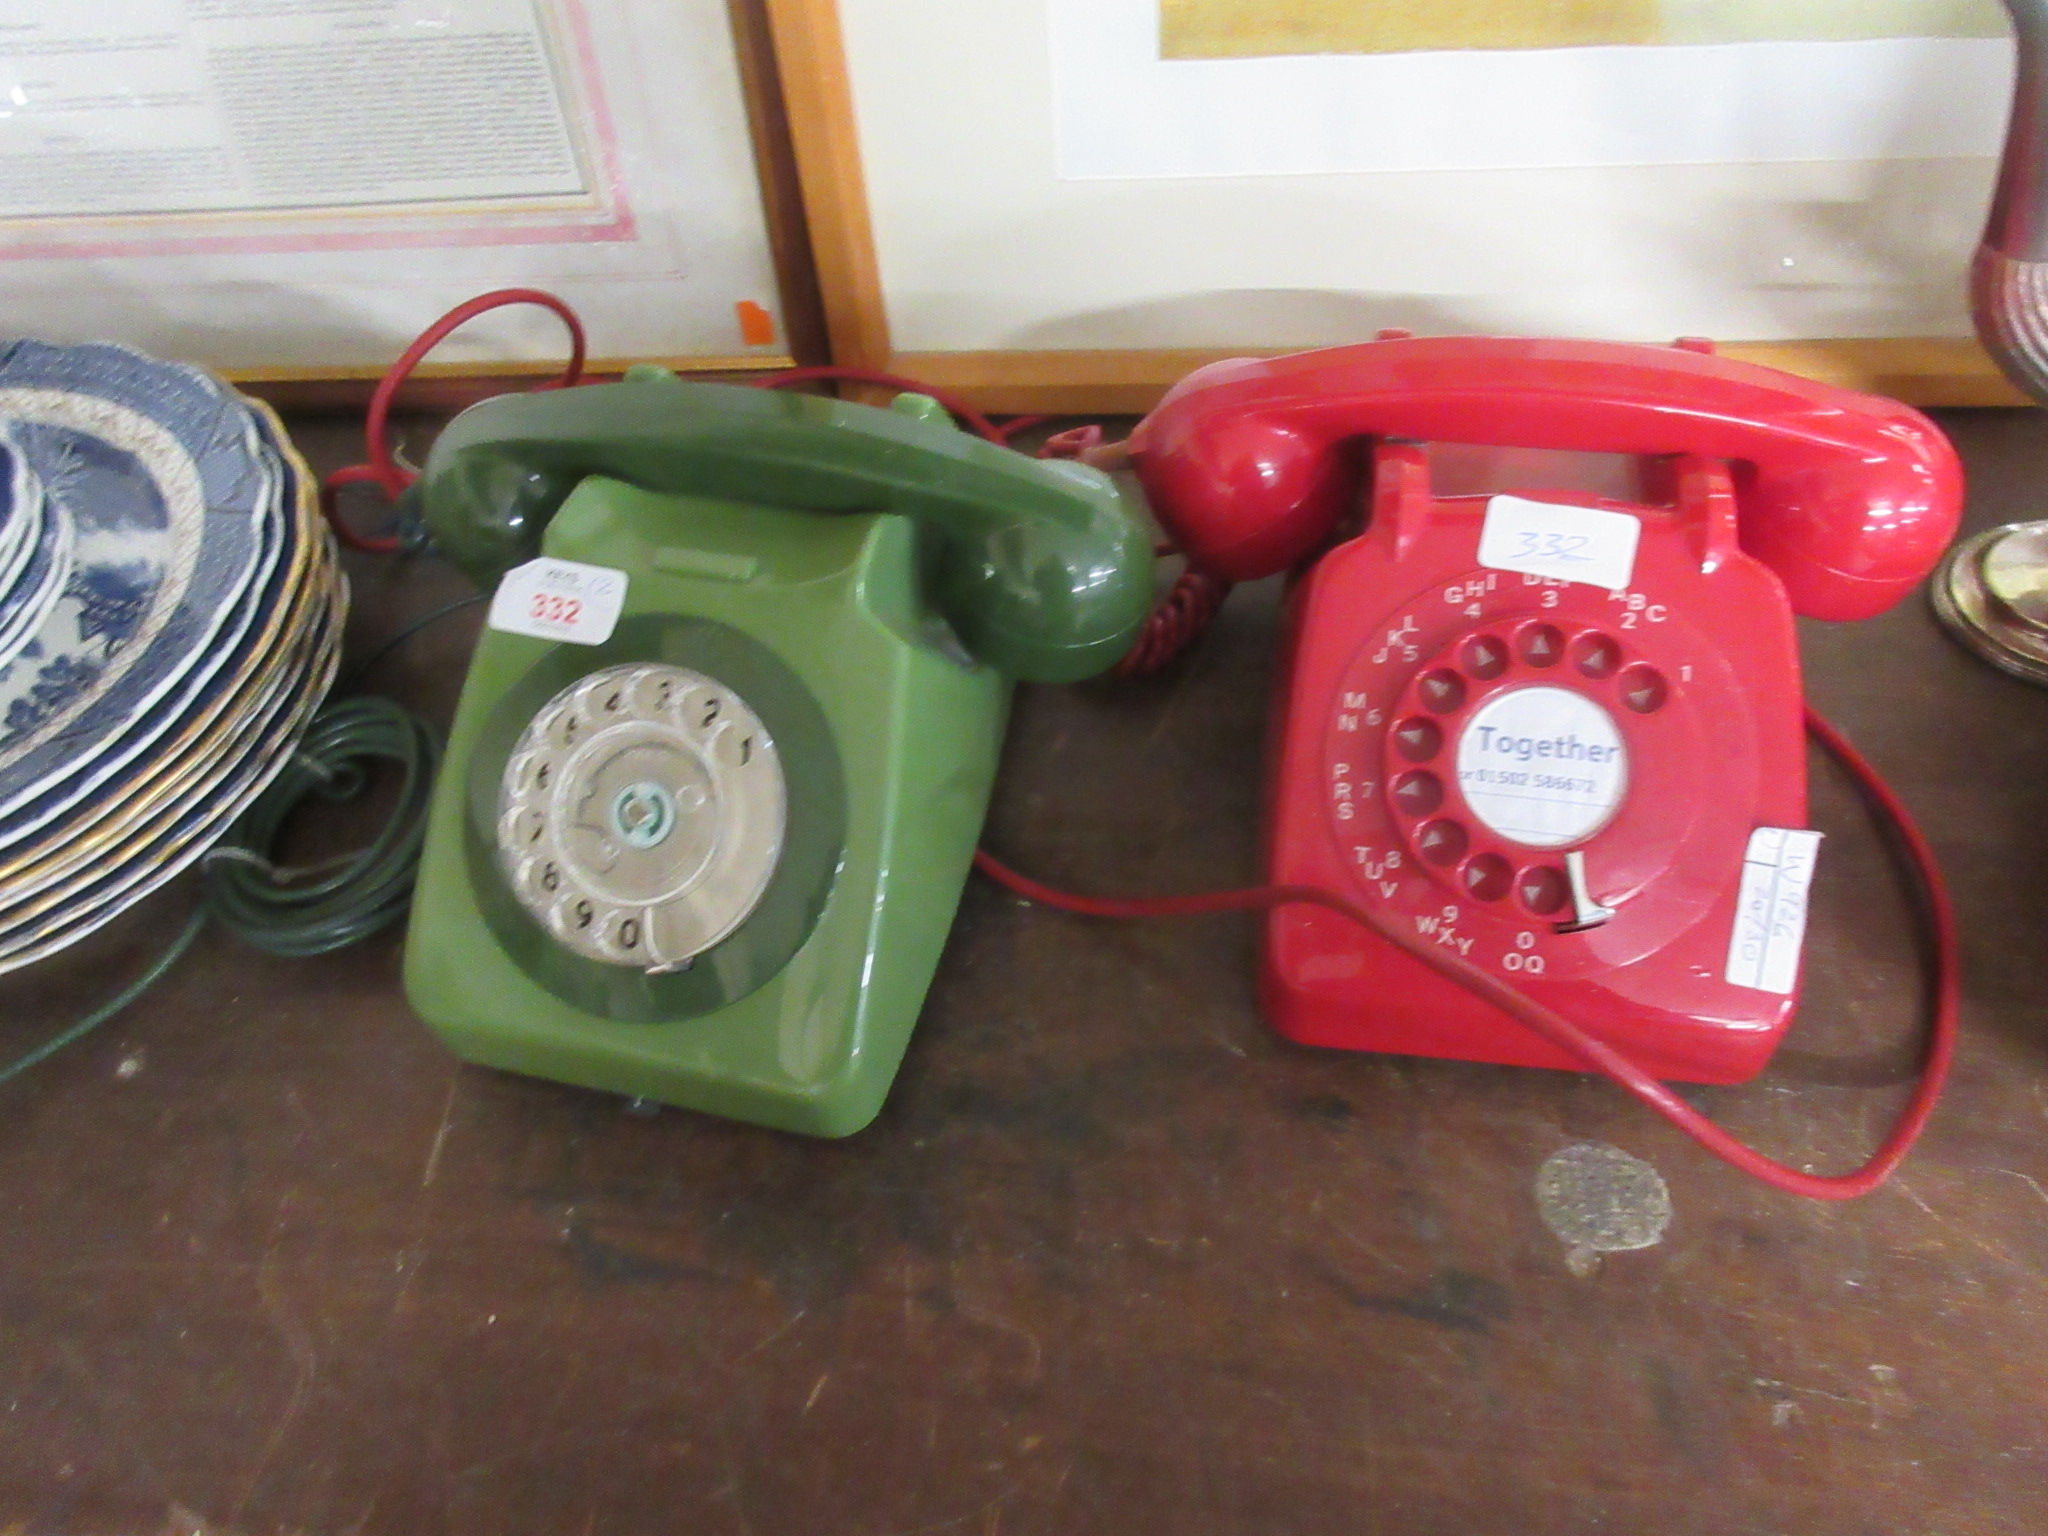 TWO 1960S/70S ANALOGUE DIAL TELEPHONES